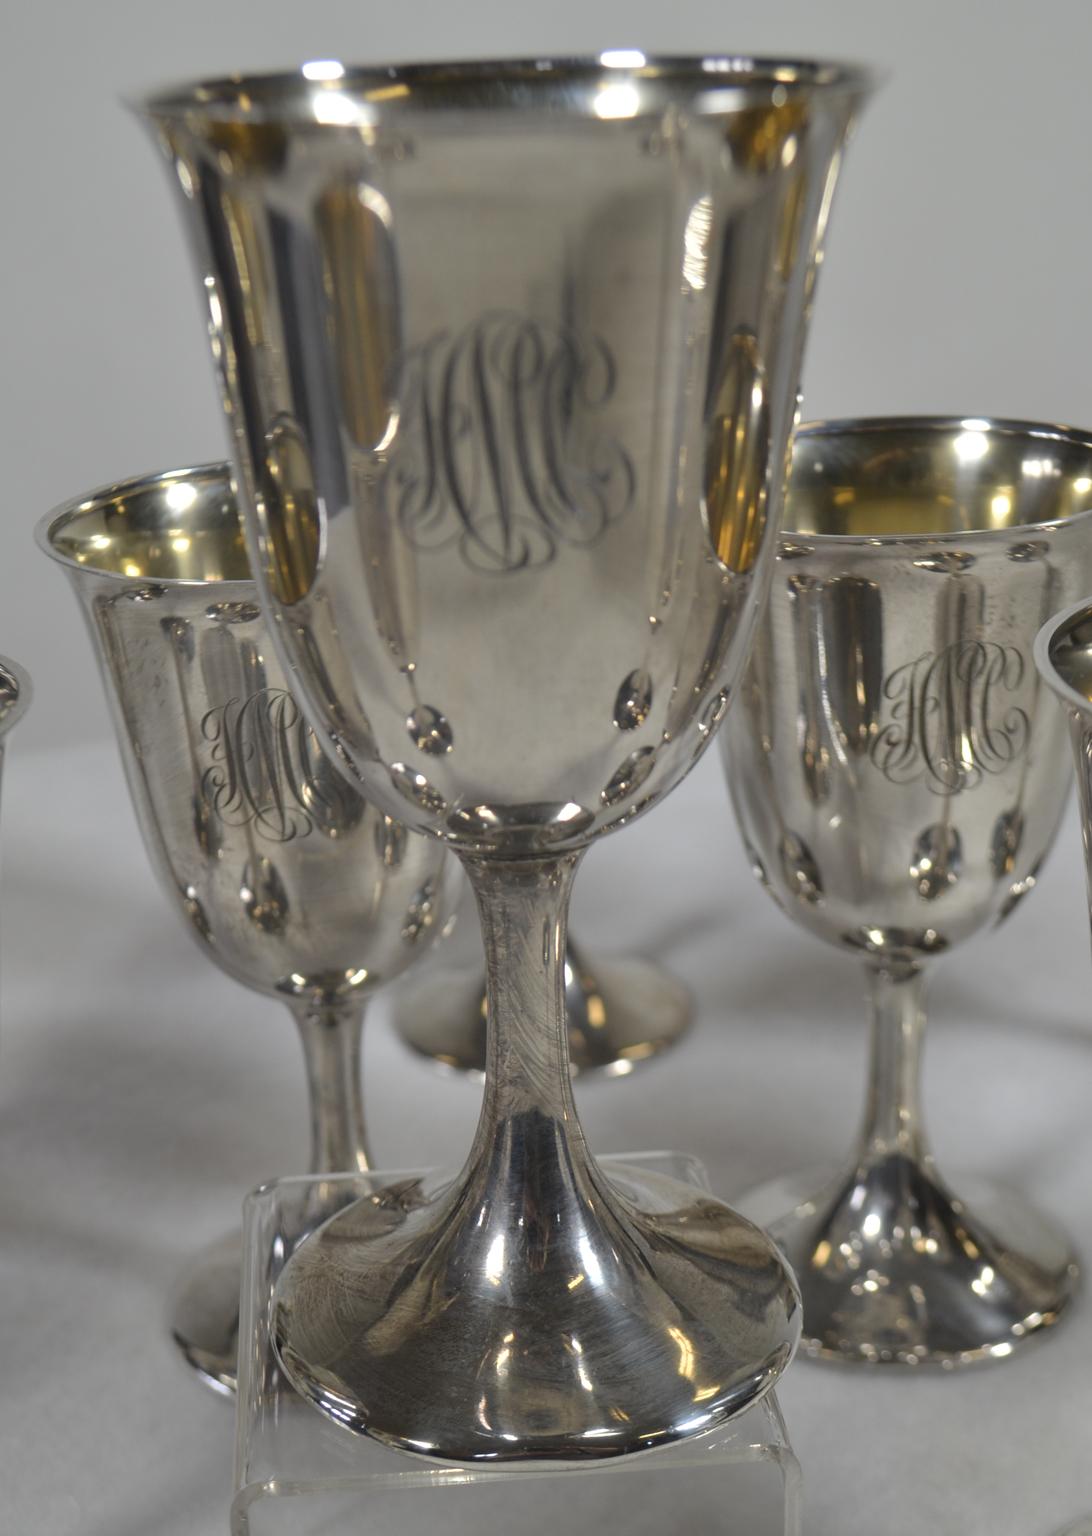 Set of 12 sterling silver goblets, early 20th century by Frank W. Smith, # G59, with gilt washed interiors, monogramed 